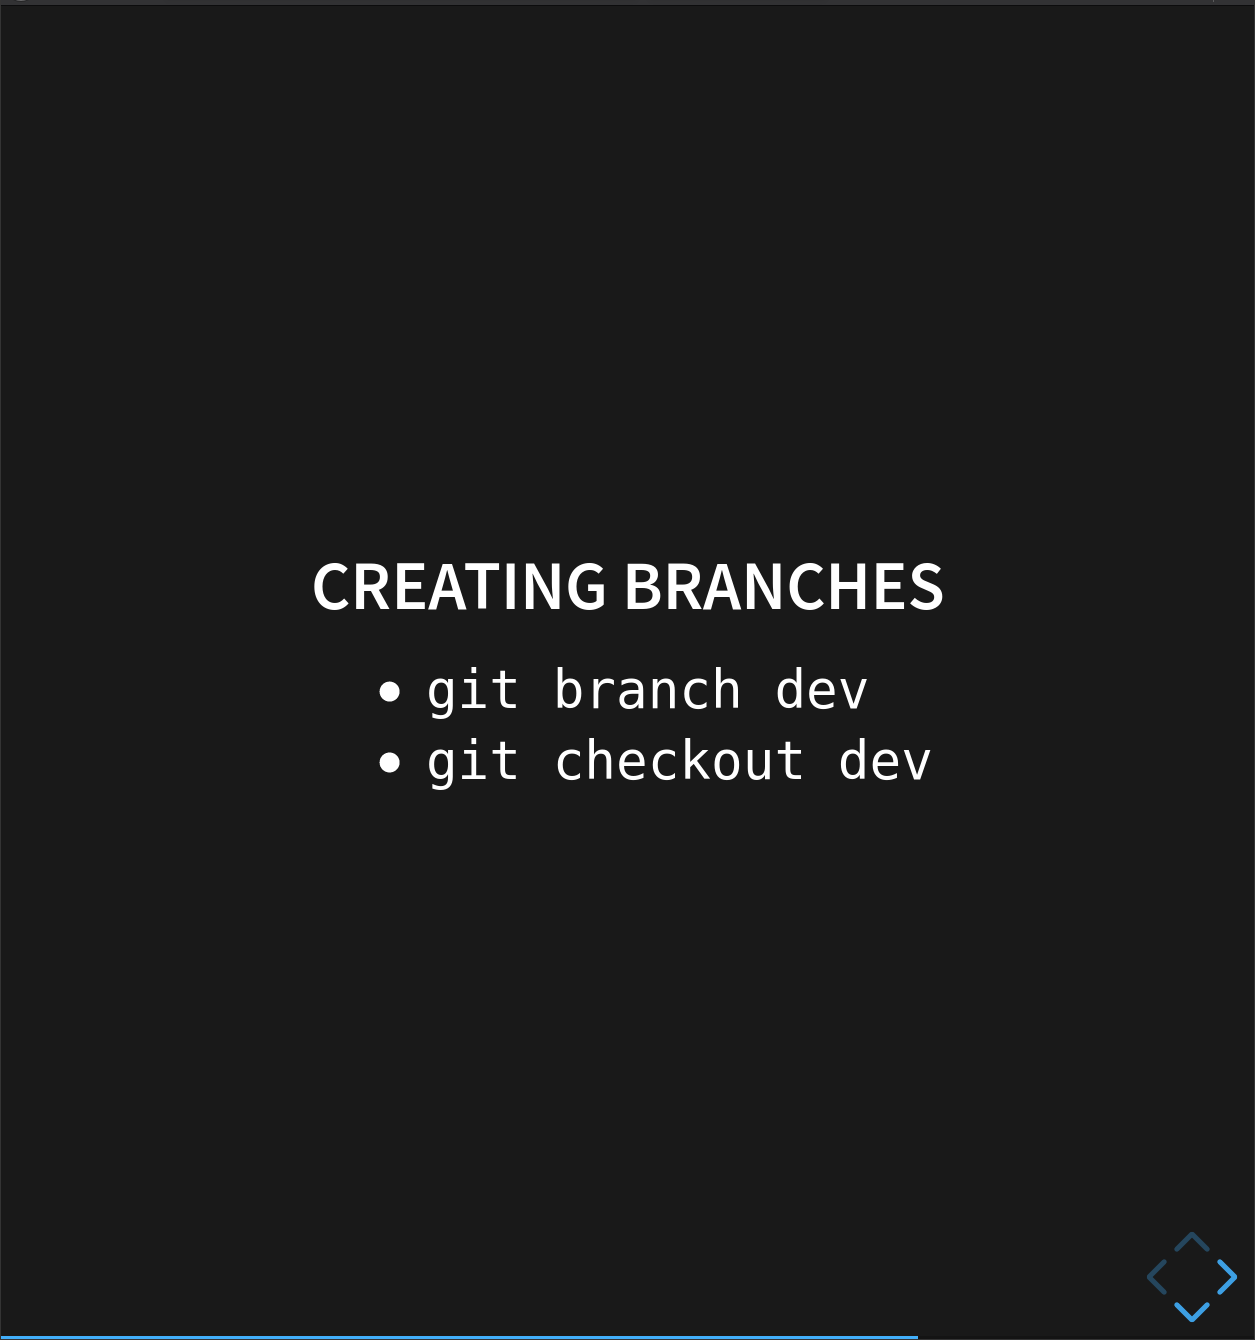 Creating branches